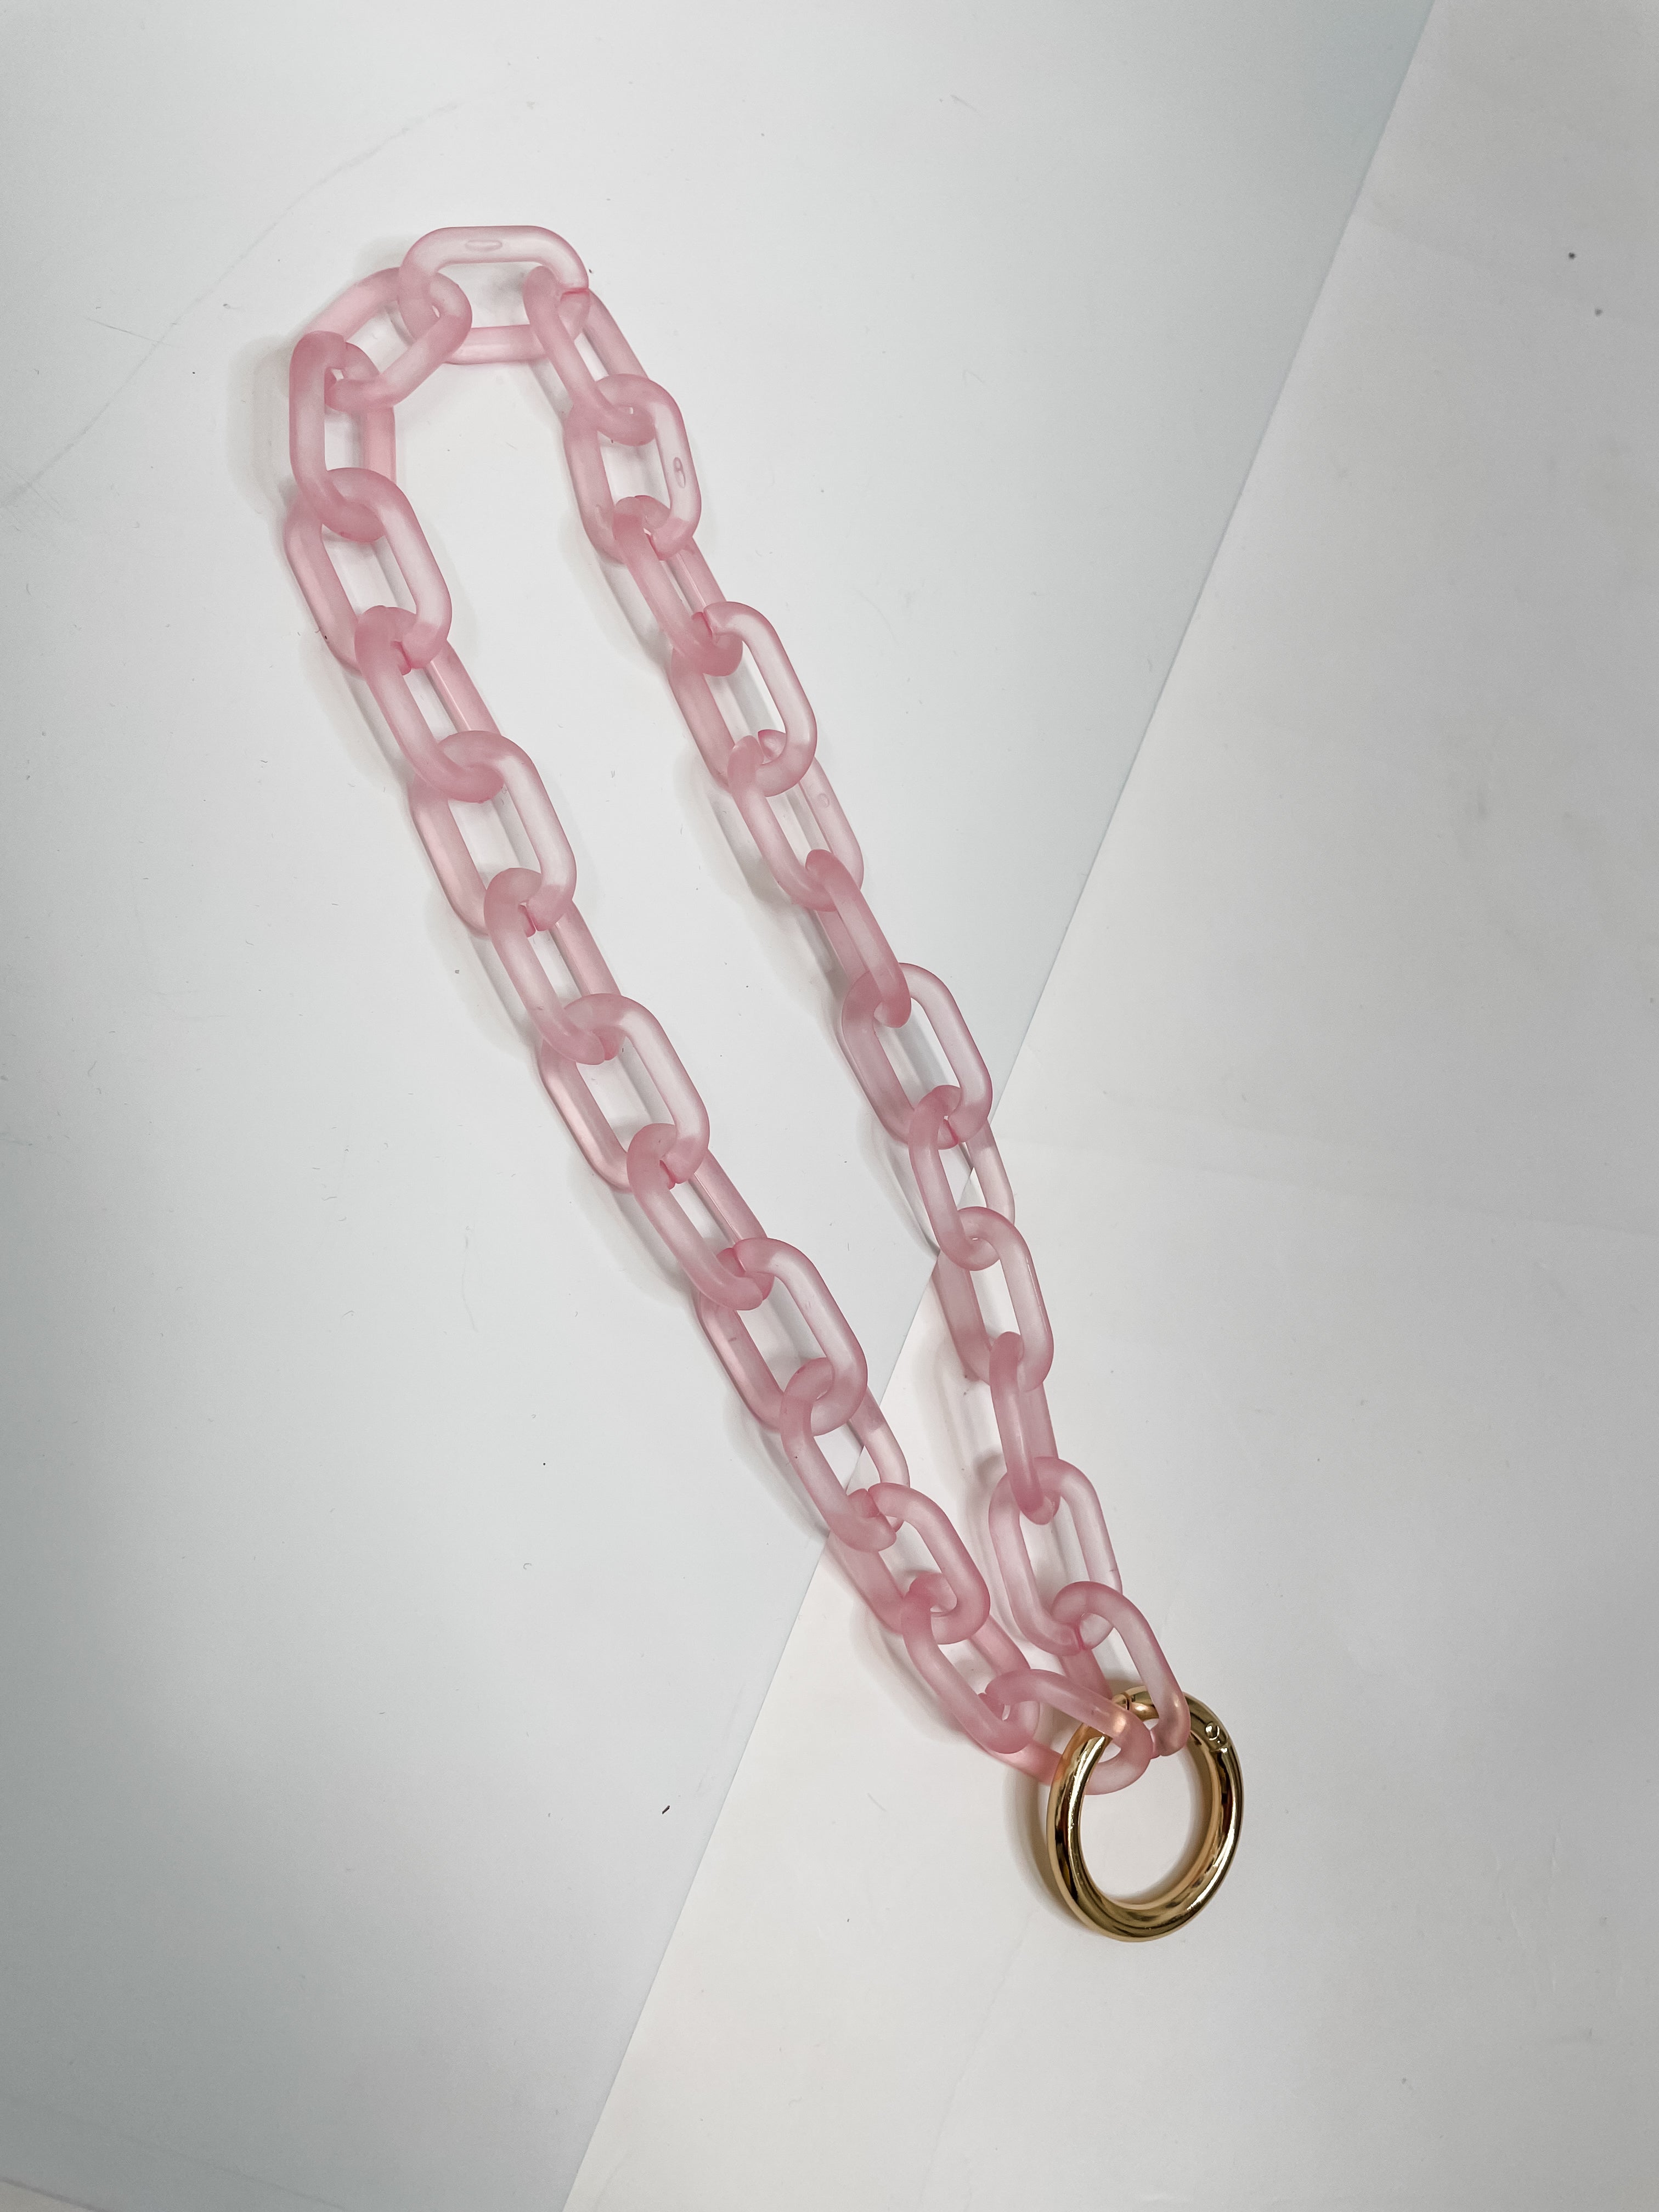 Acrylic Chain Link Necklace - Light Pink